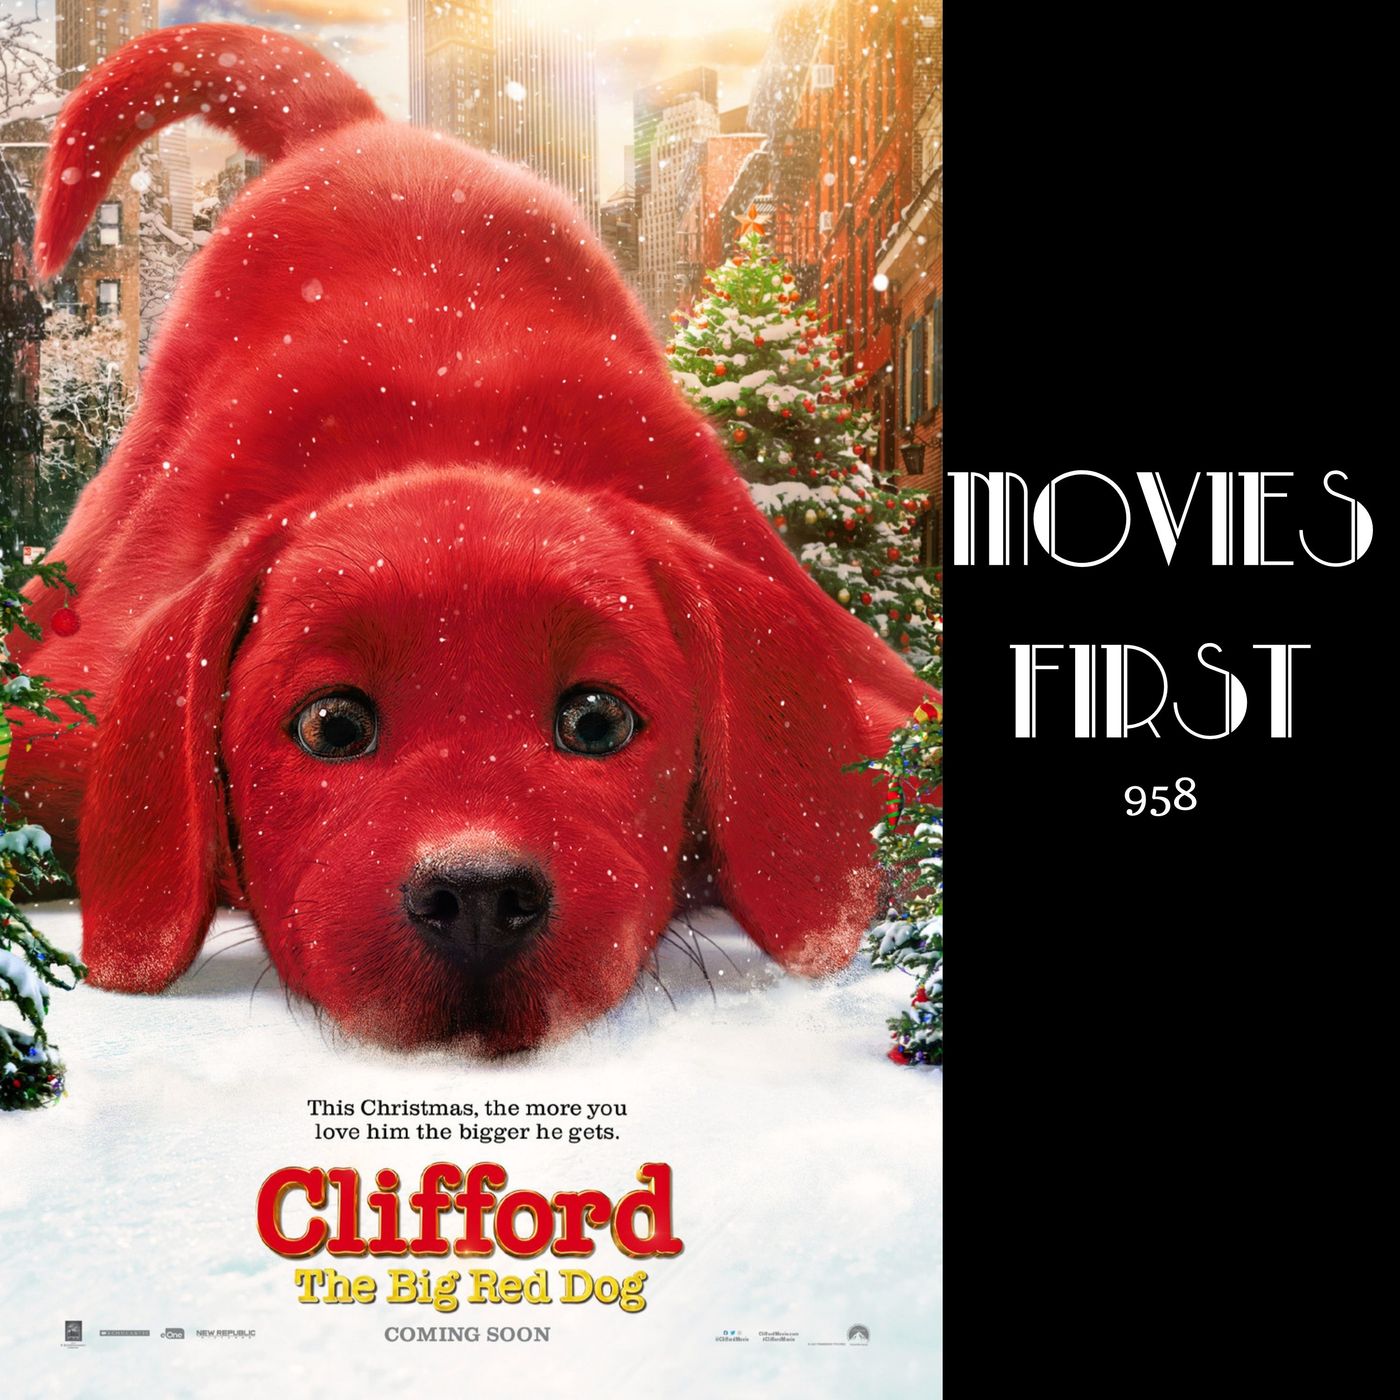 Clifford the Big Red Dog (Adventure, Comedy, Family) Review